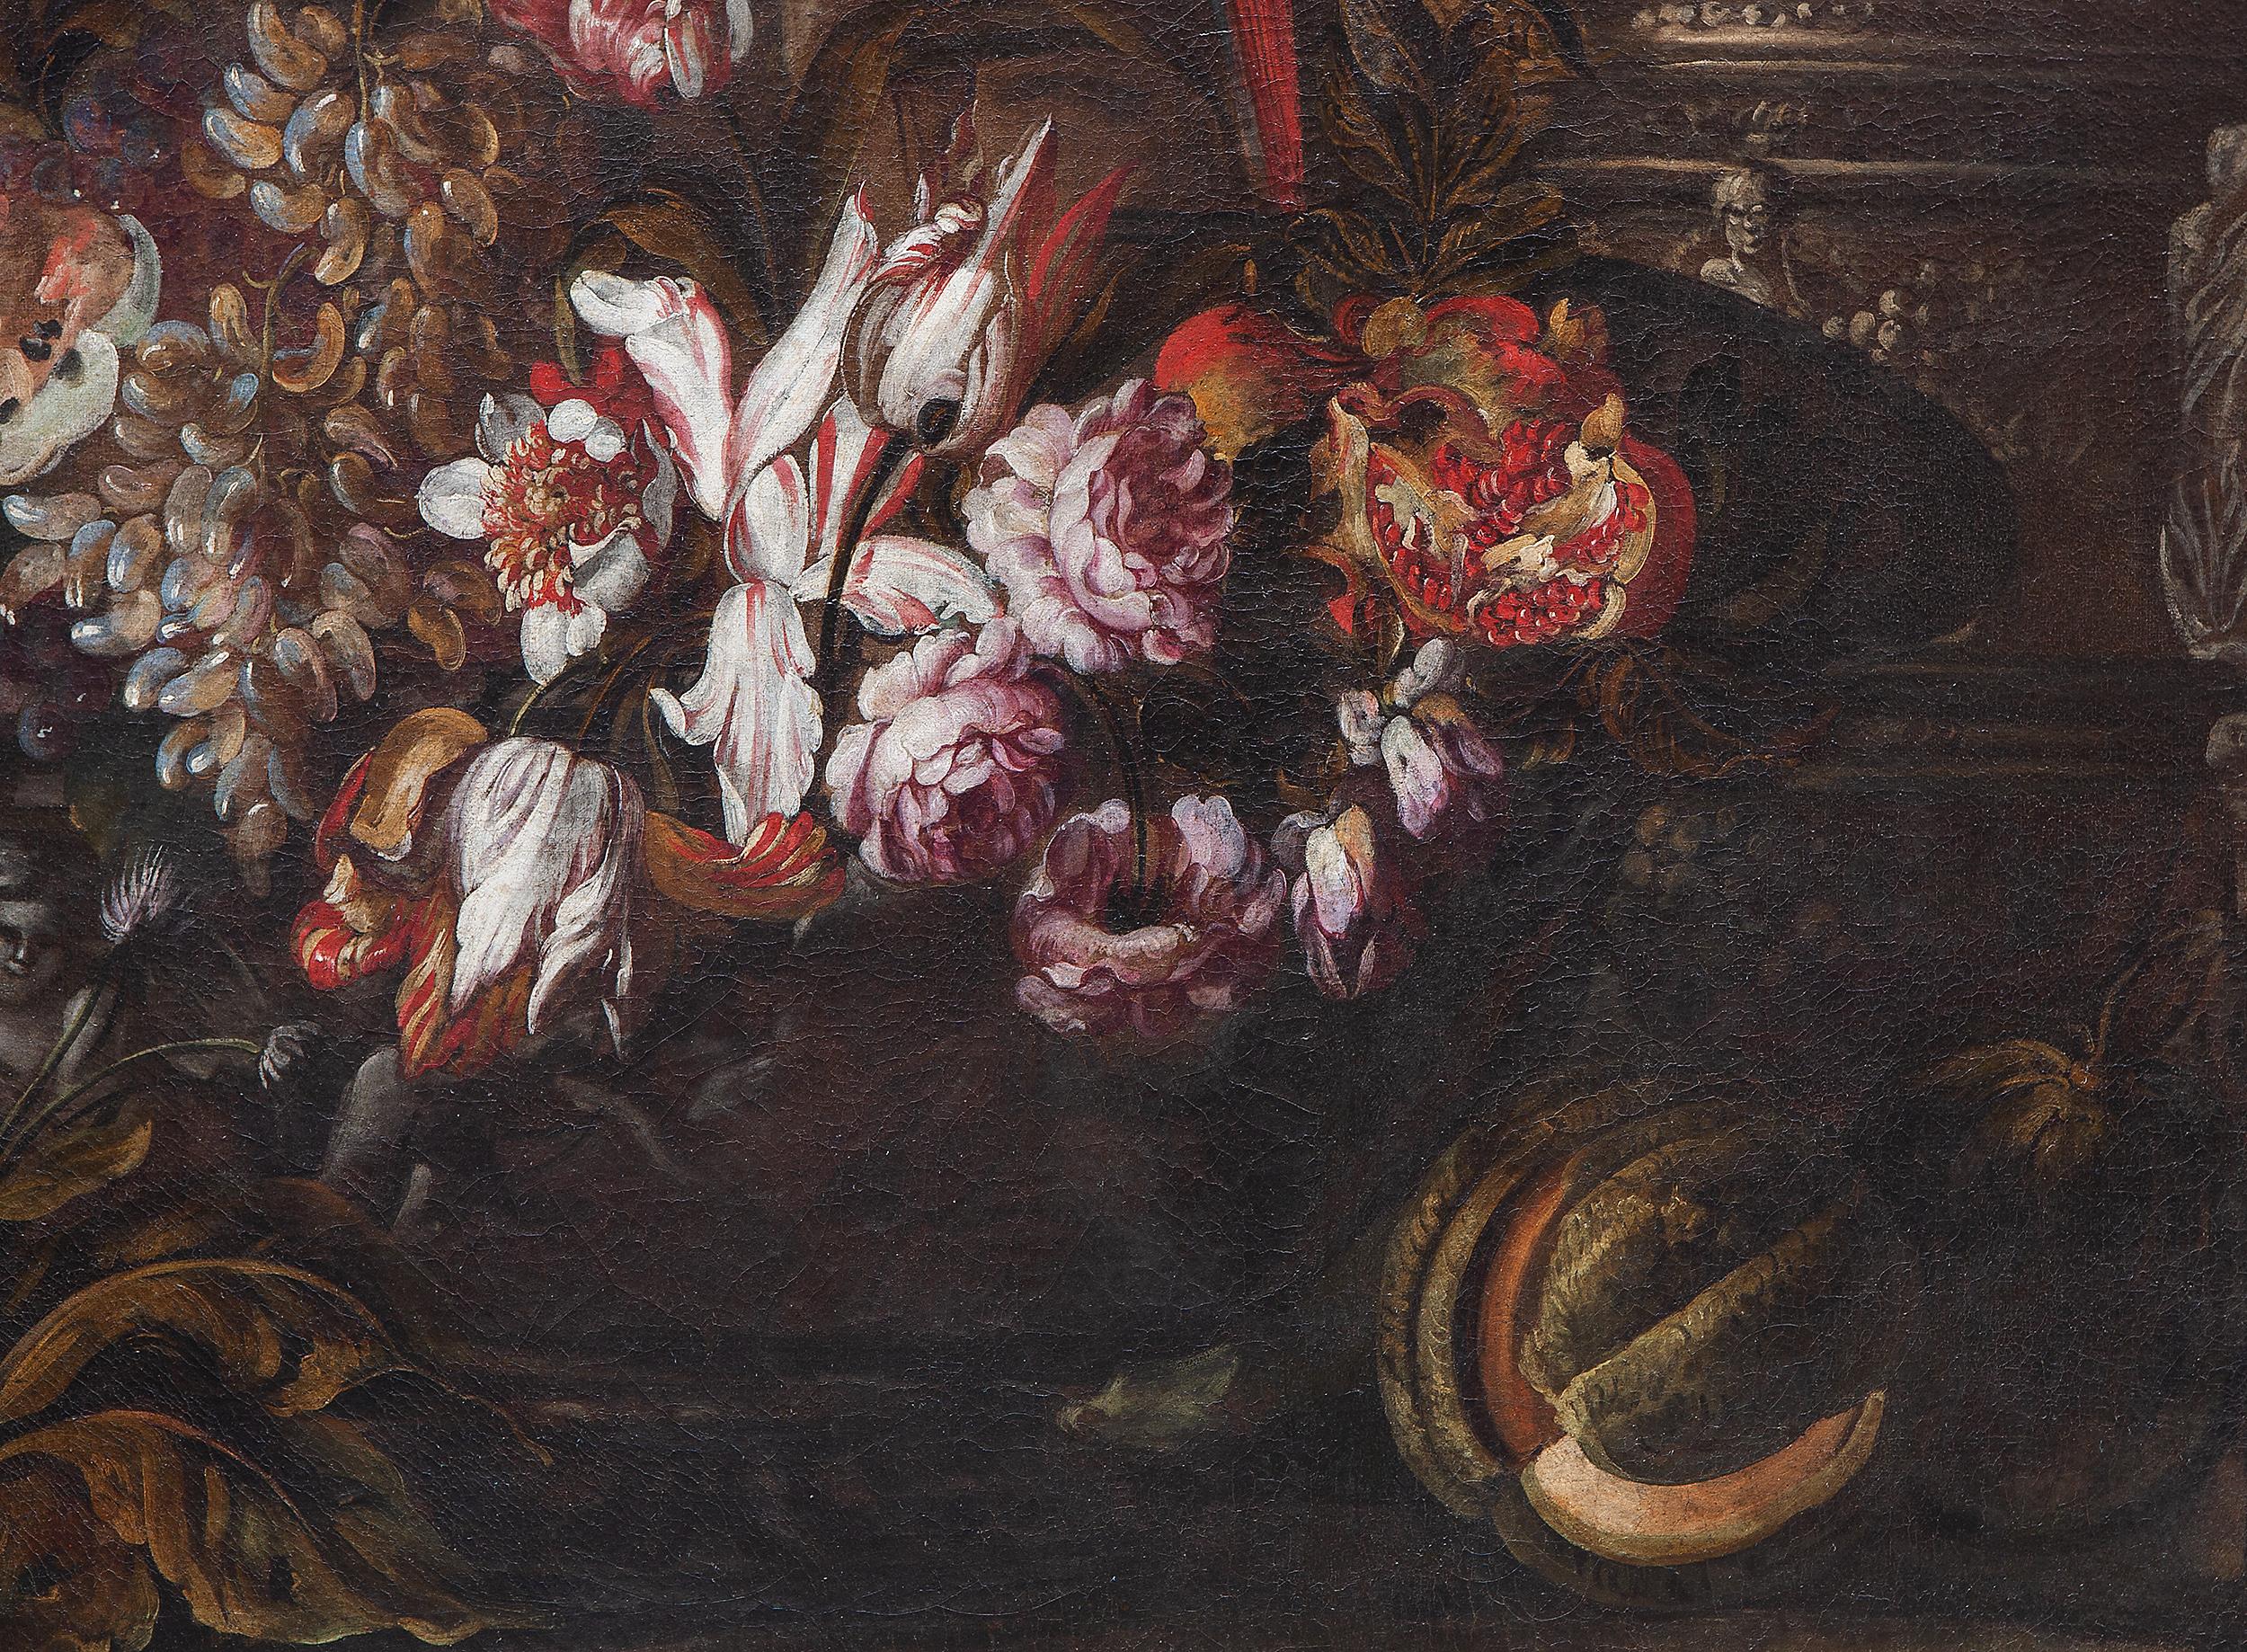 NORTHERN ARTIST ACTIVE IN ROME IN THE LAST QUARTER OF THE XVII CENTURY 
Still life with flowers, fruits, historiated vases, a parrot and a monkey 

The painting is part of a pair: the twin can also be seen in the gallery, but they can be purchased